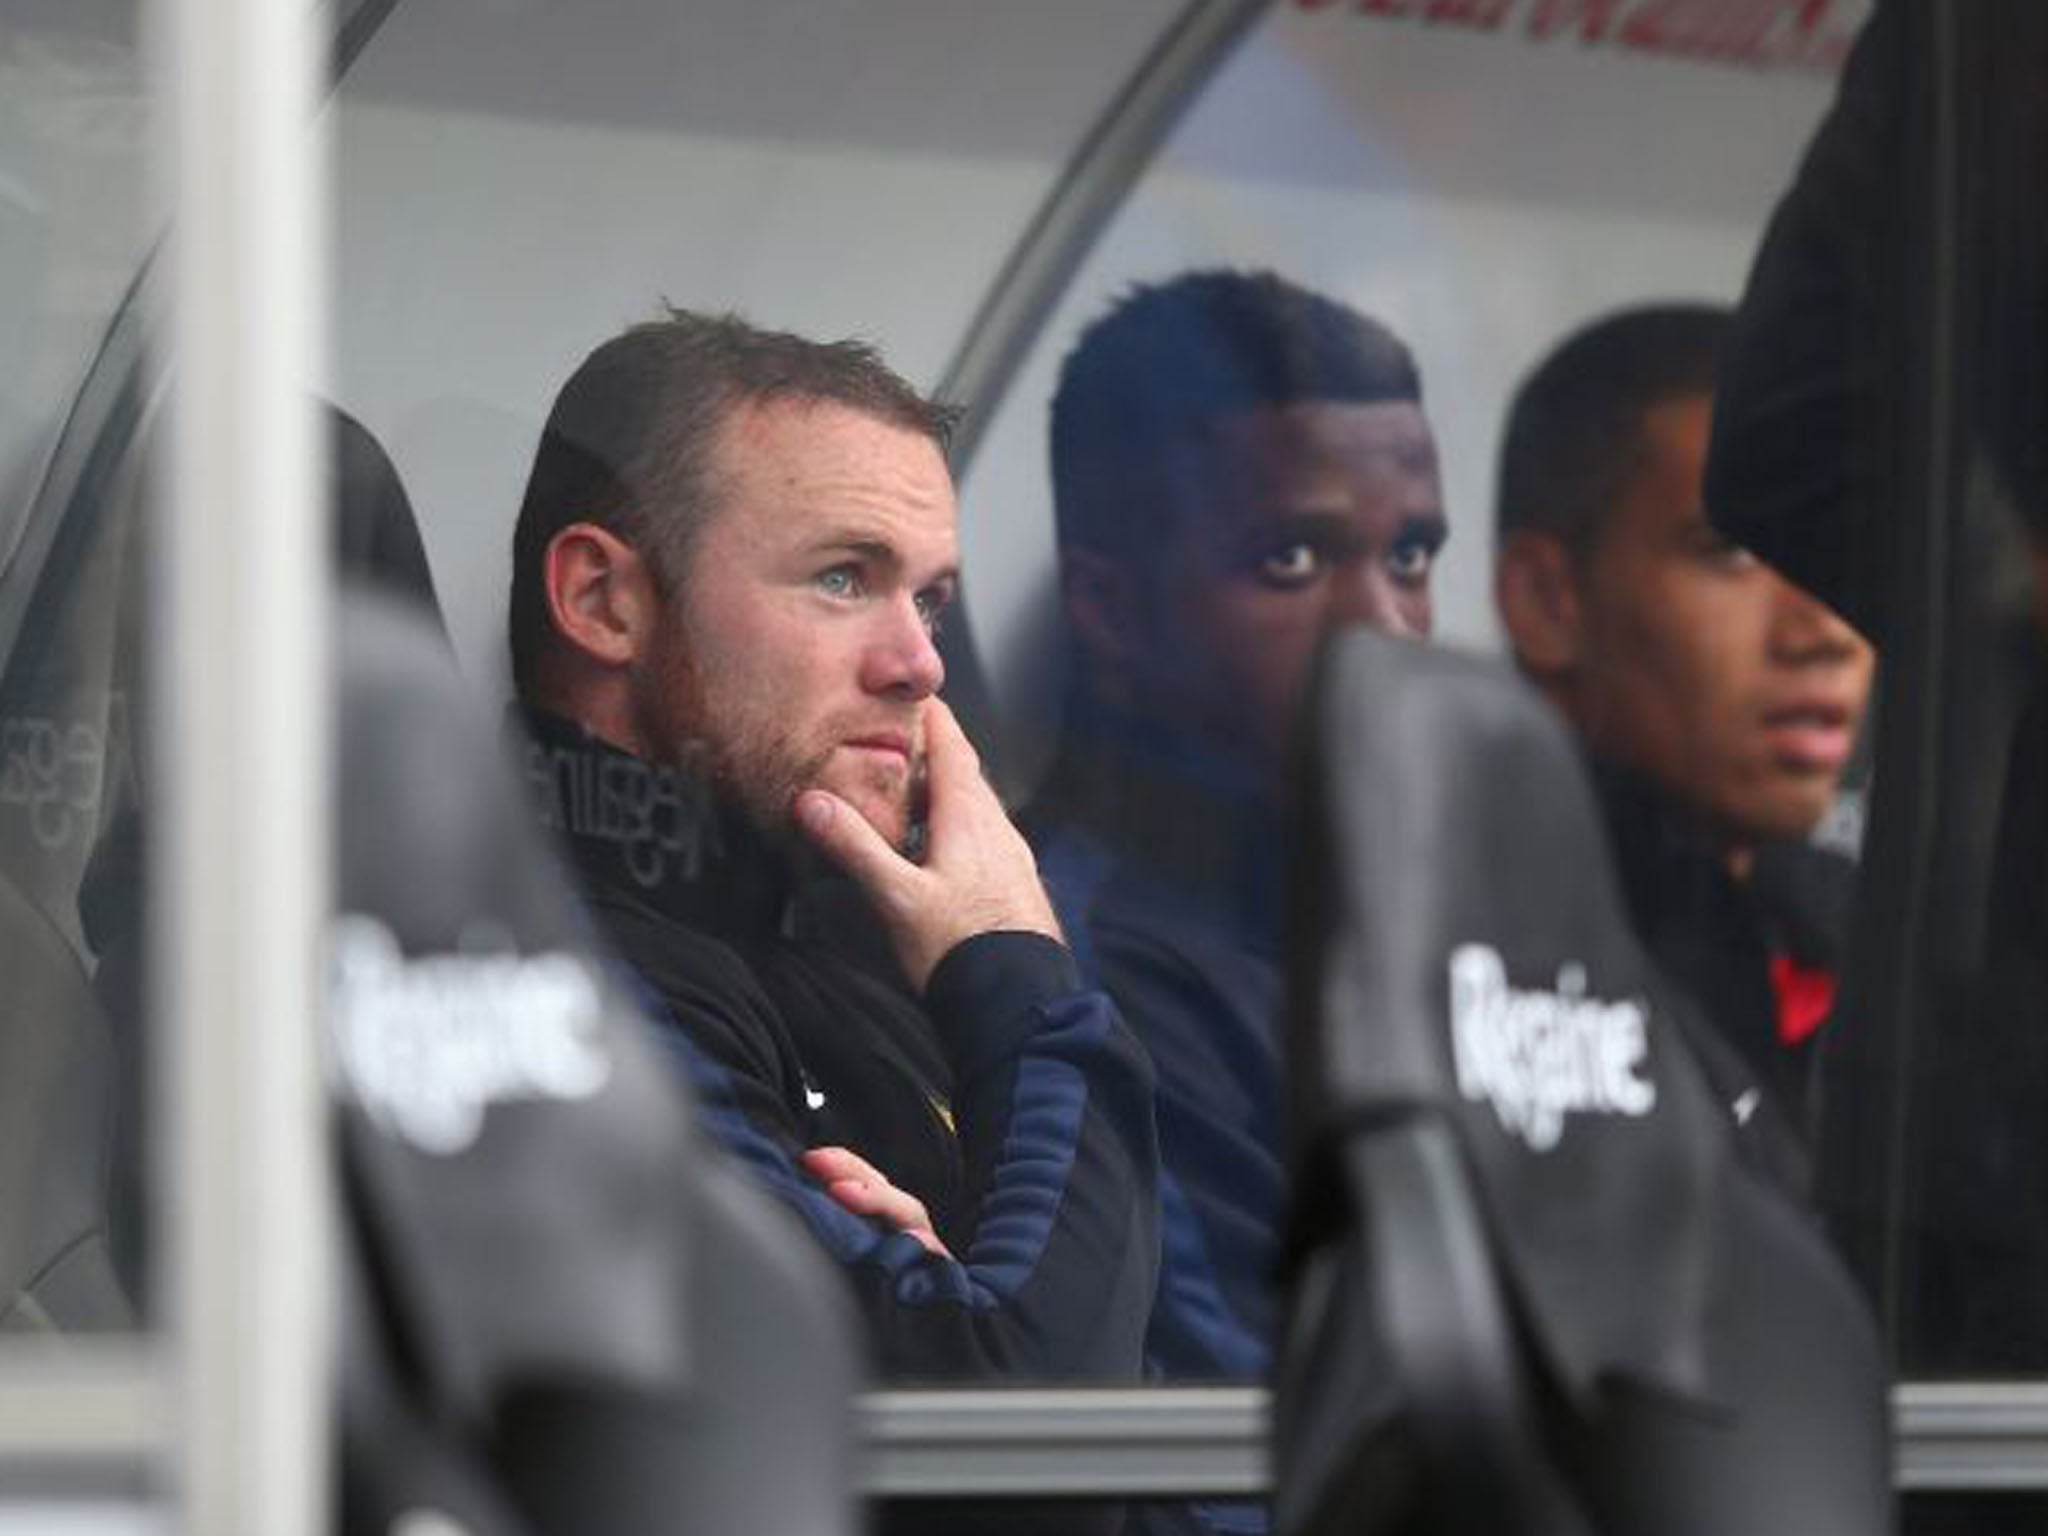 Wayne Rooney came off the bench to assist Manchester United's third and four goals - although his body language did not suggest contentment (Michael Steele/Getty Images)